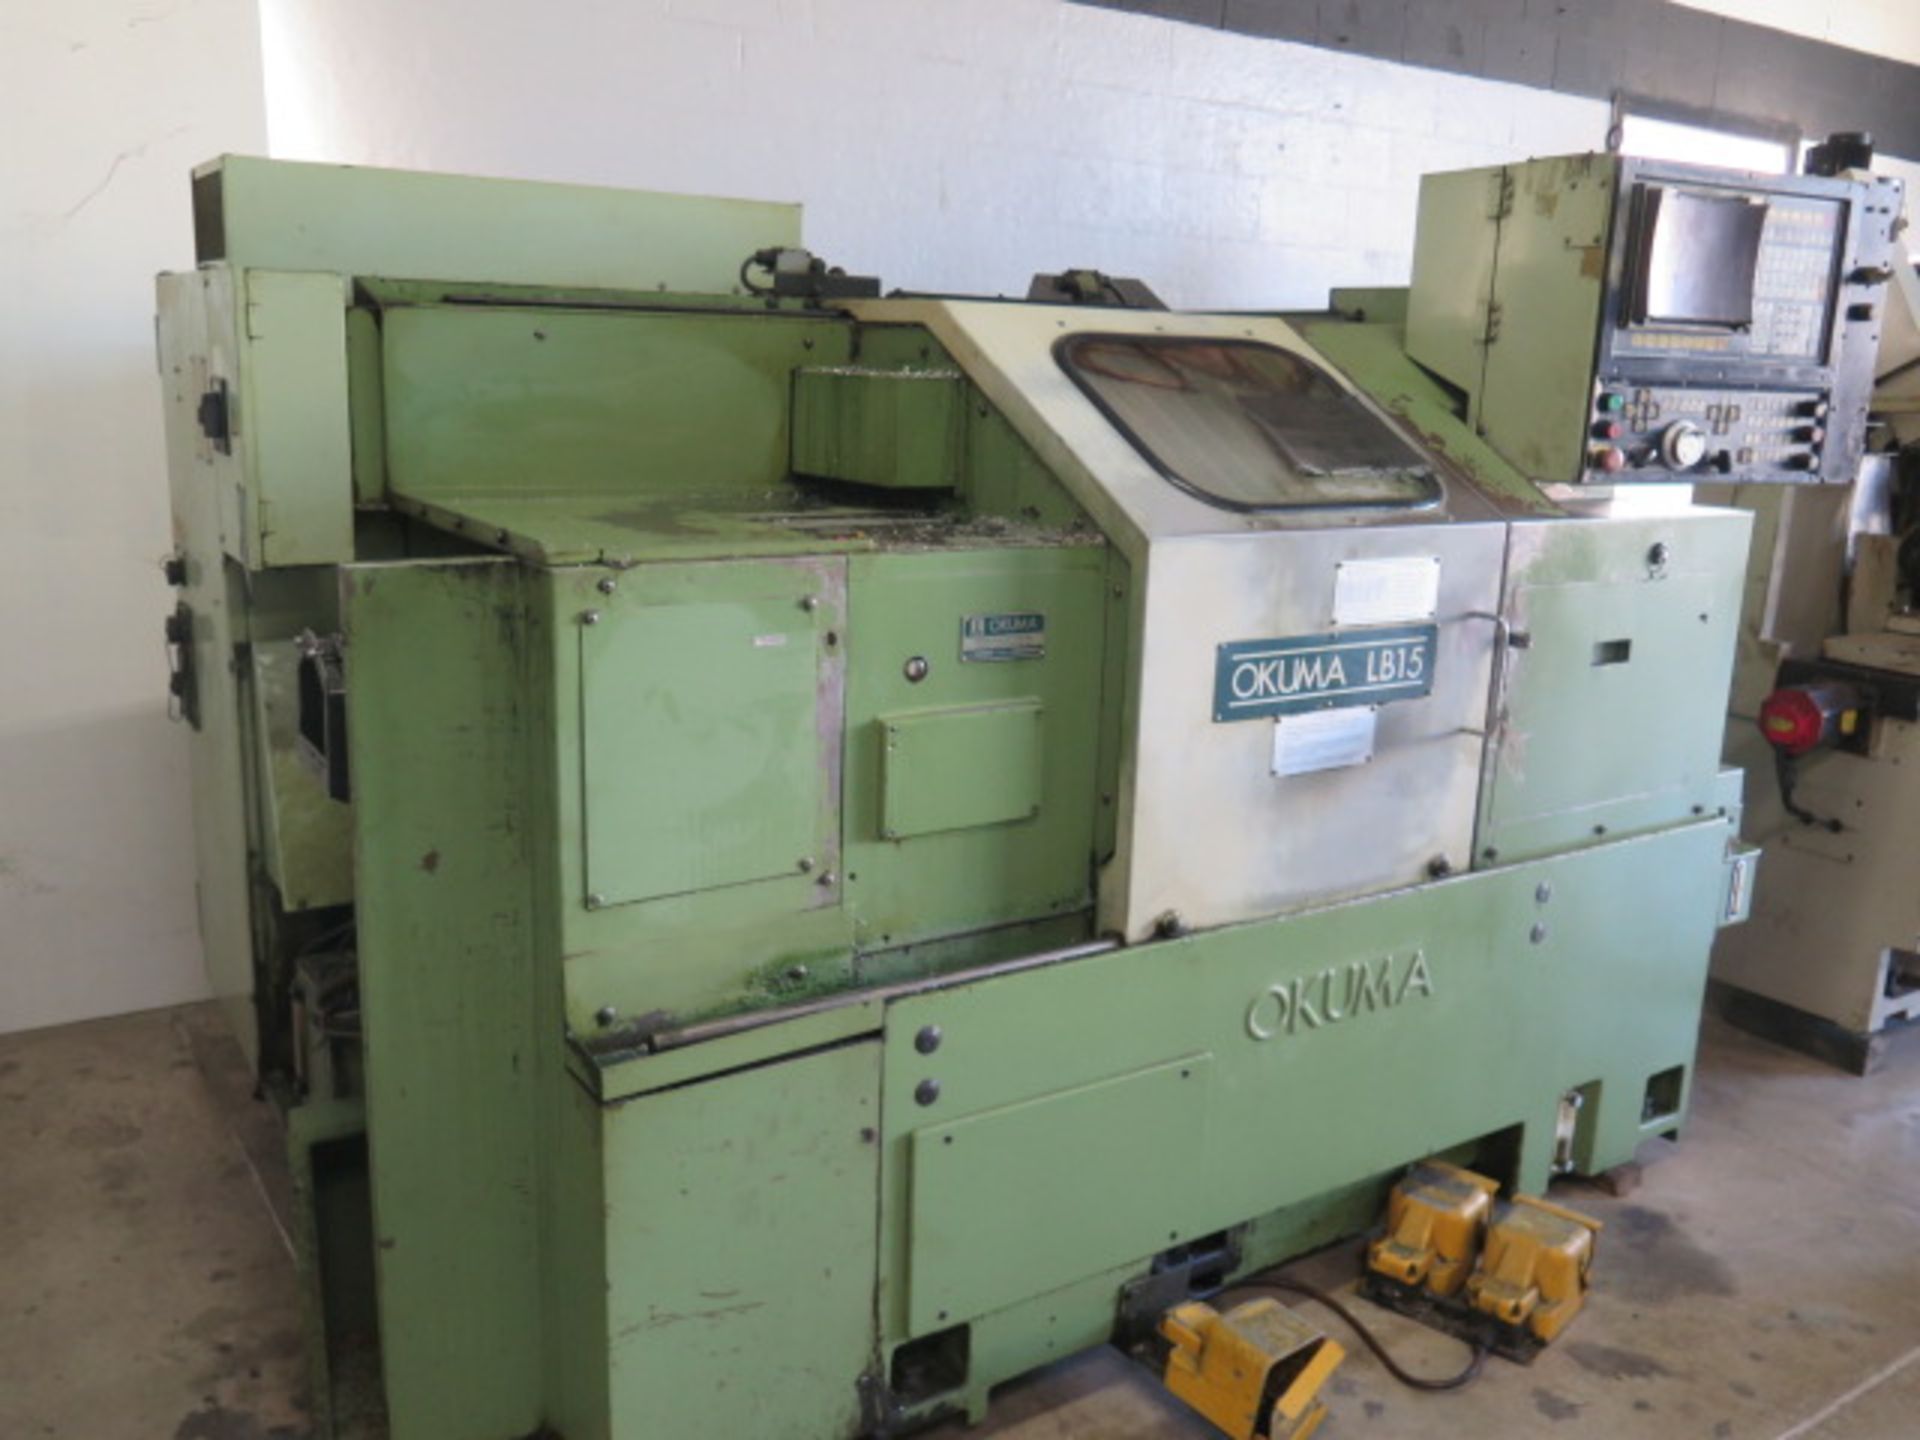 Okuma LB15 CNC Turning Center s/n 9282 w/ OSP5000 L-G Controls, 12-Station Turret, SOLD AS IS - Image 3 of 12